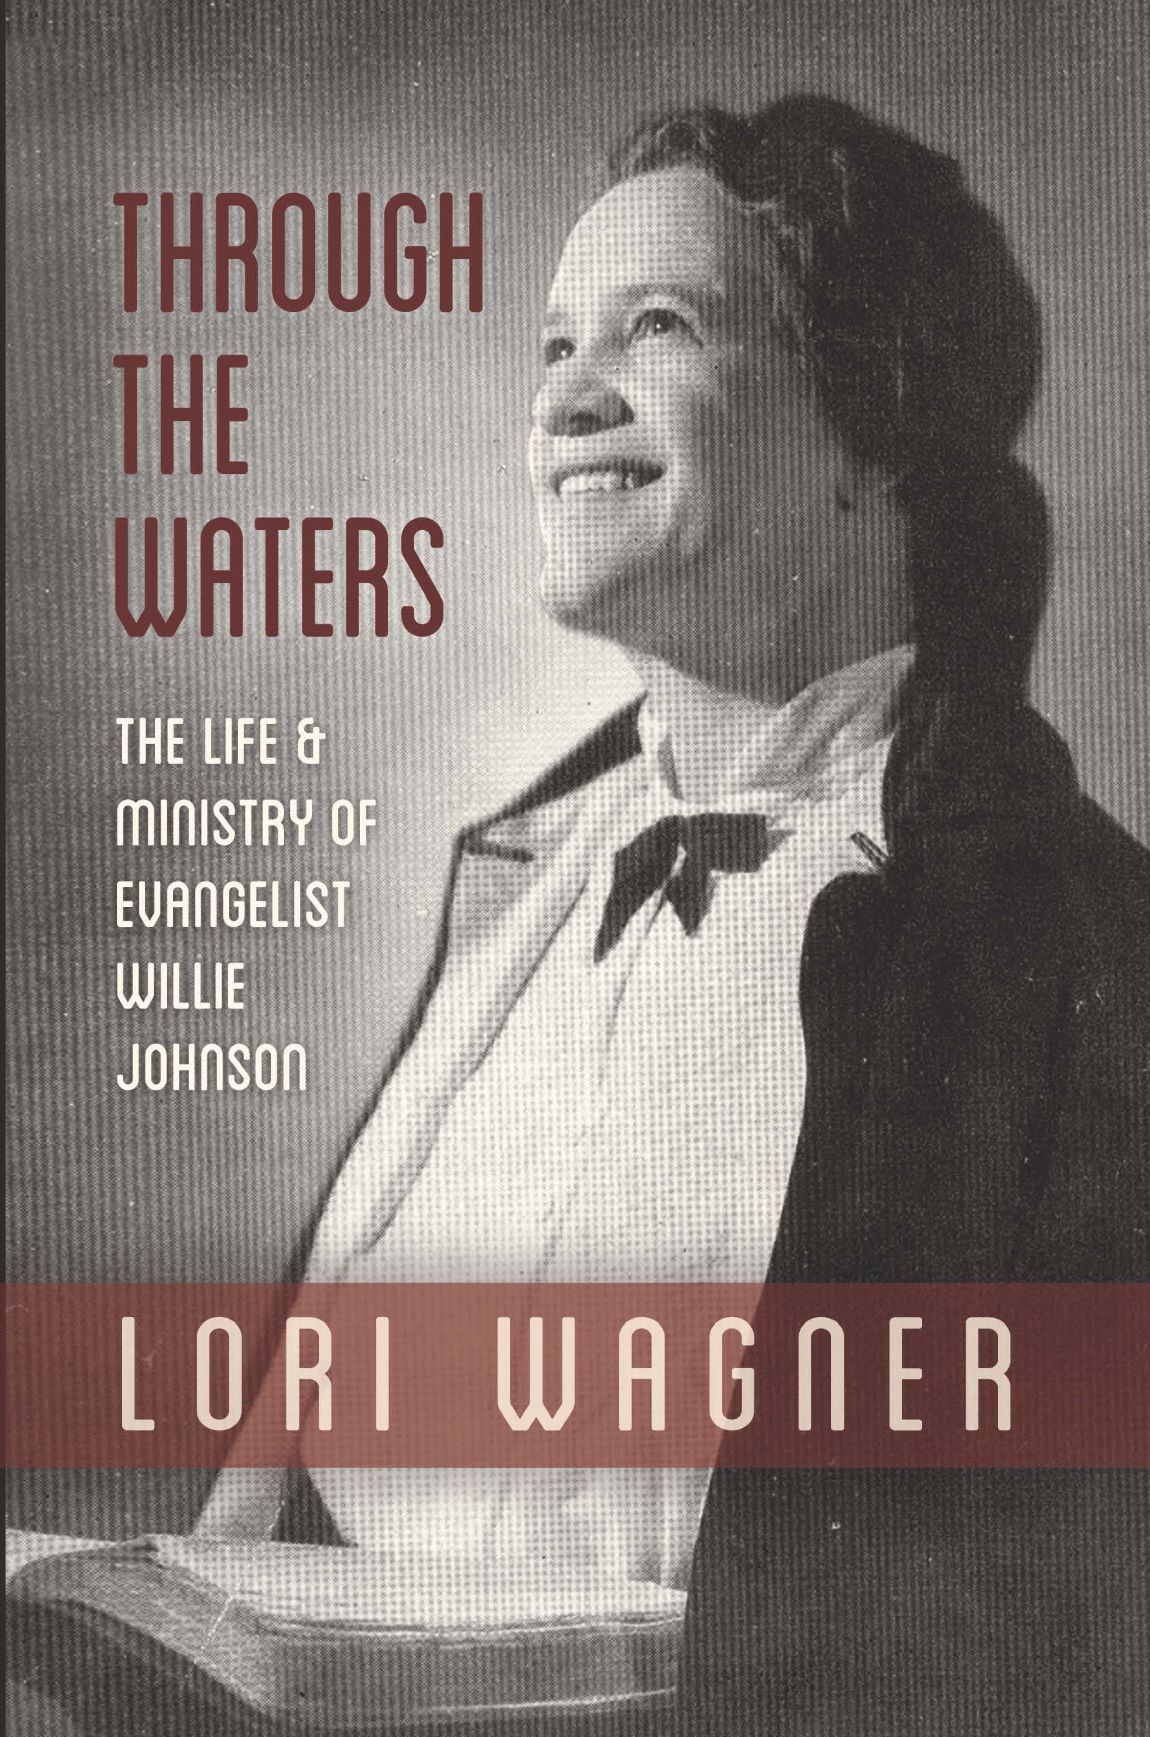 Through The Waters: The Life & Ministry of Evangelist Willie Johnson - Lori Wagner